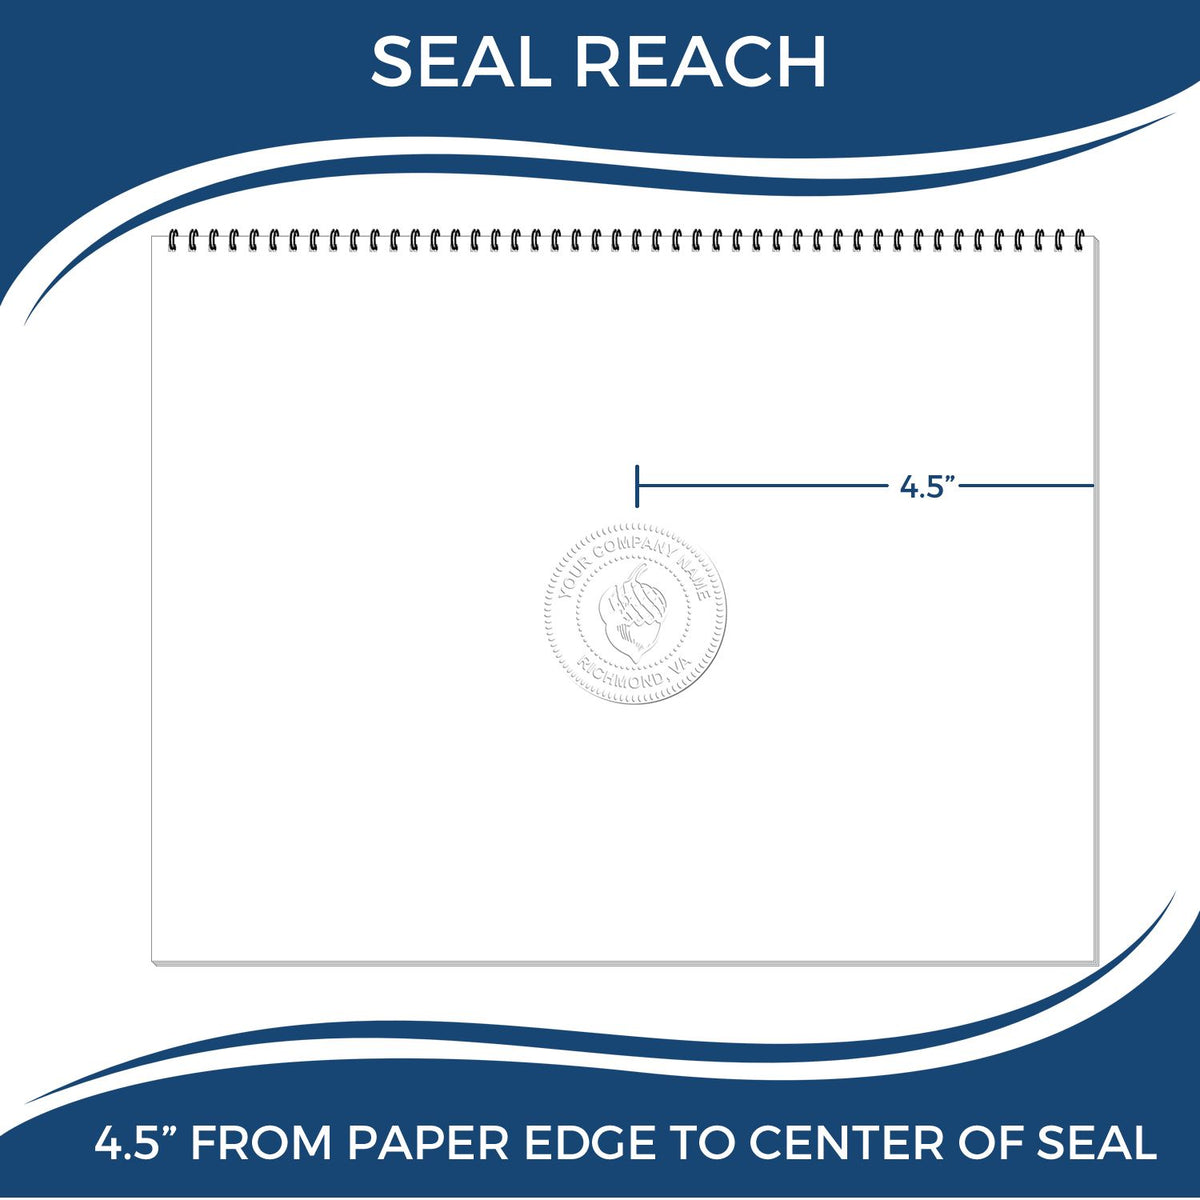 An infographic showing the seal reach which is represented by a ruler and a miniature seal image of the State of Colorado Extended Long Reach Geologist Seal